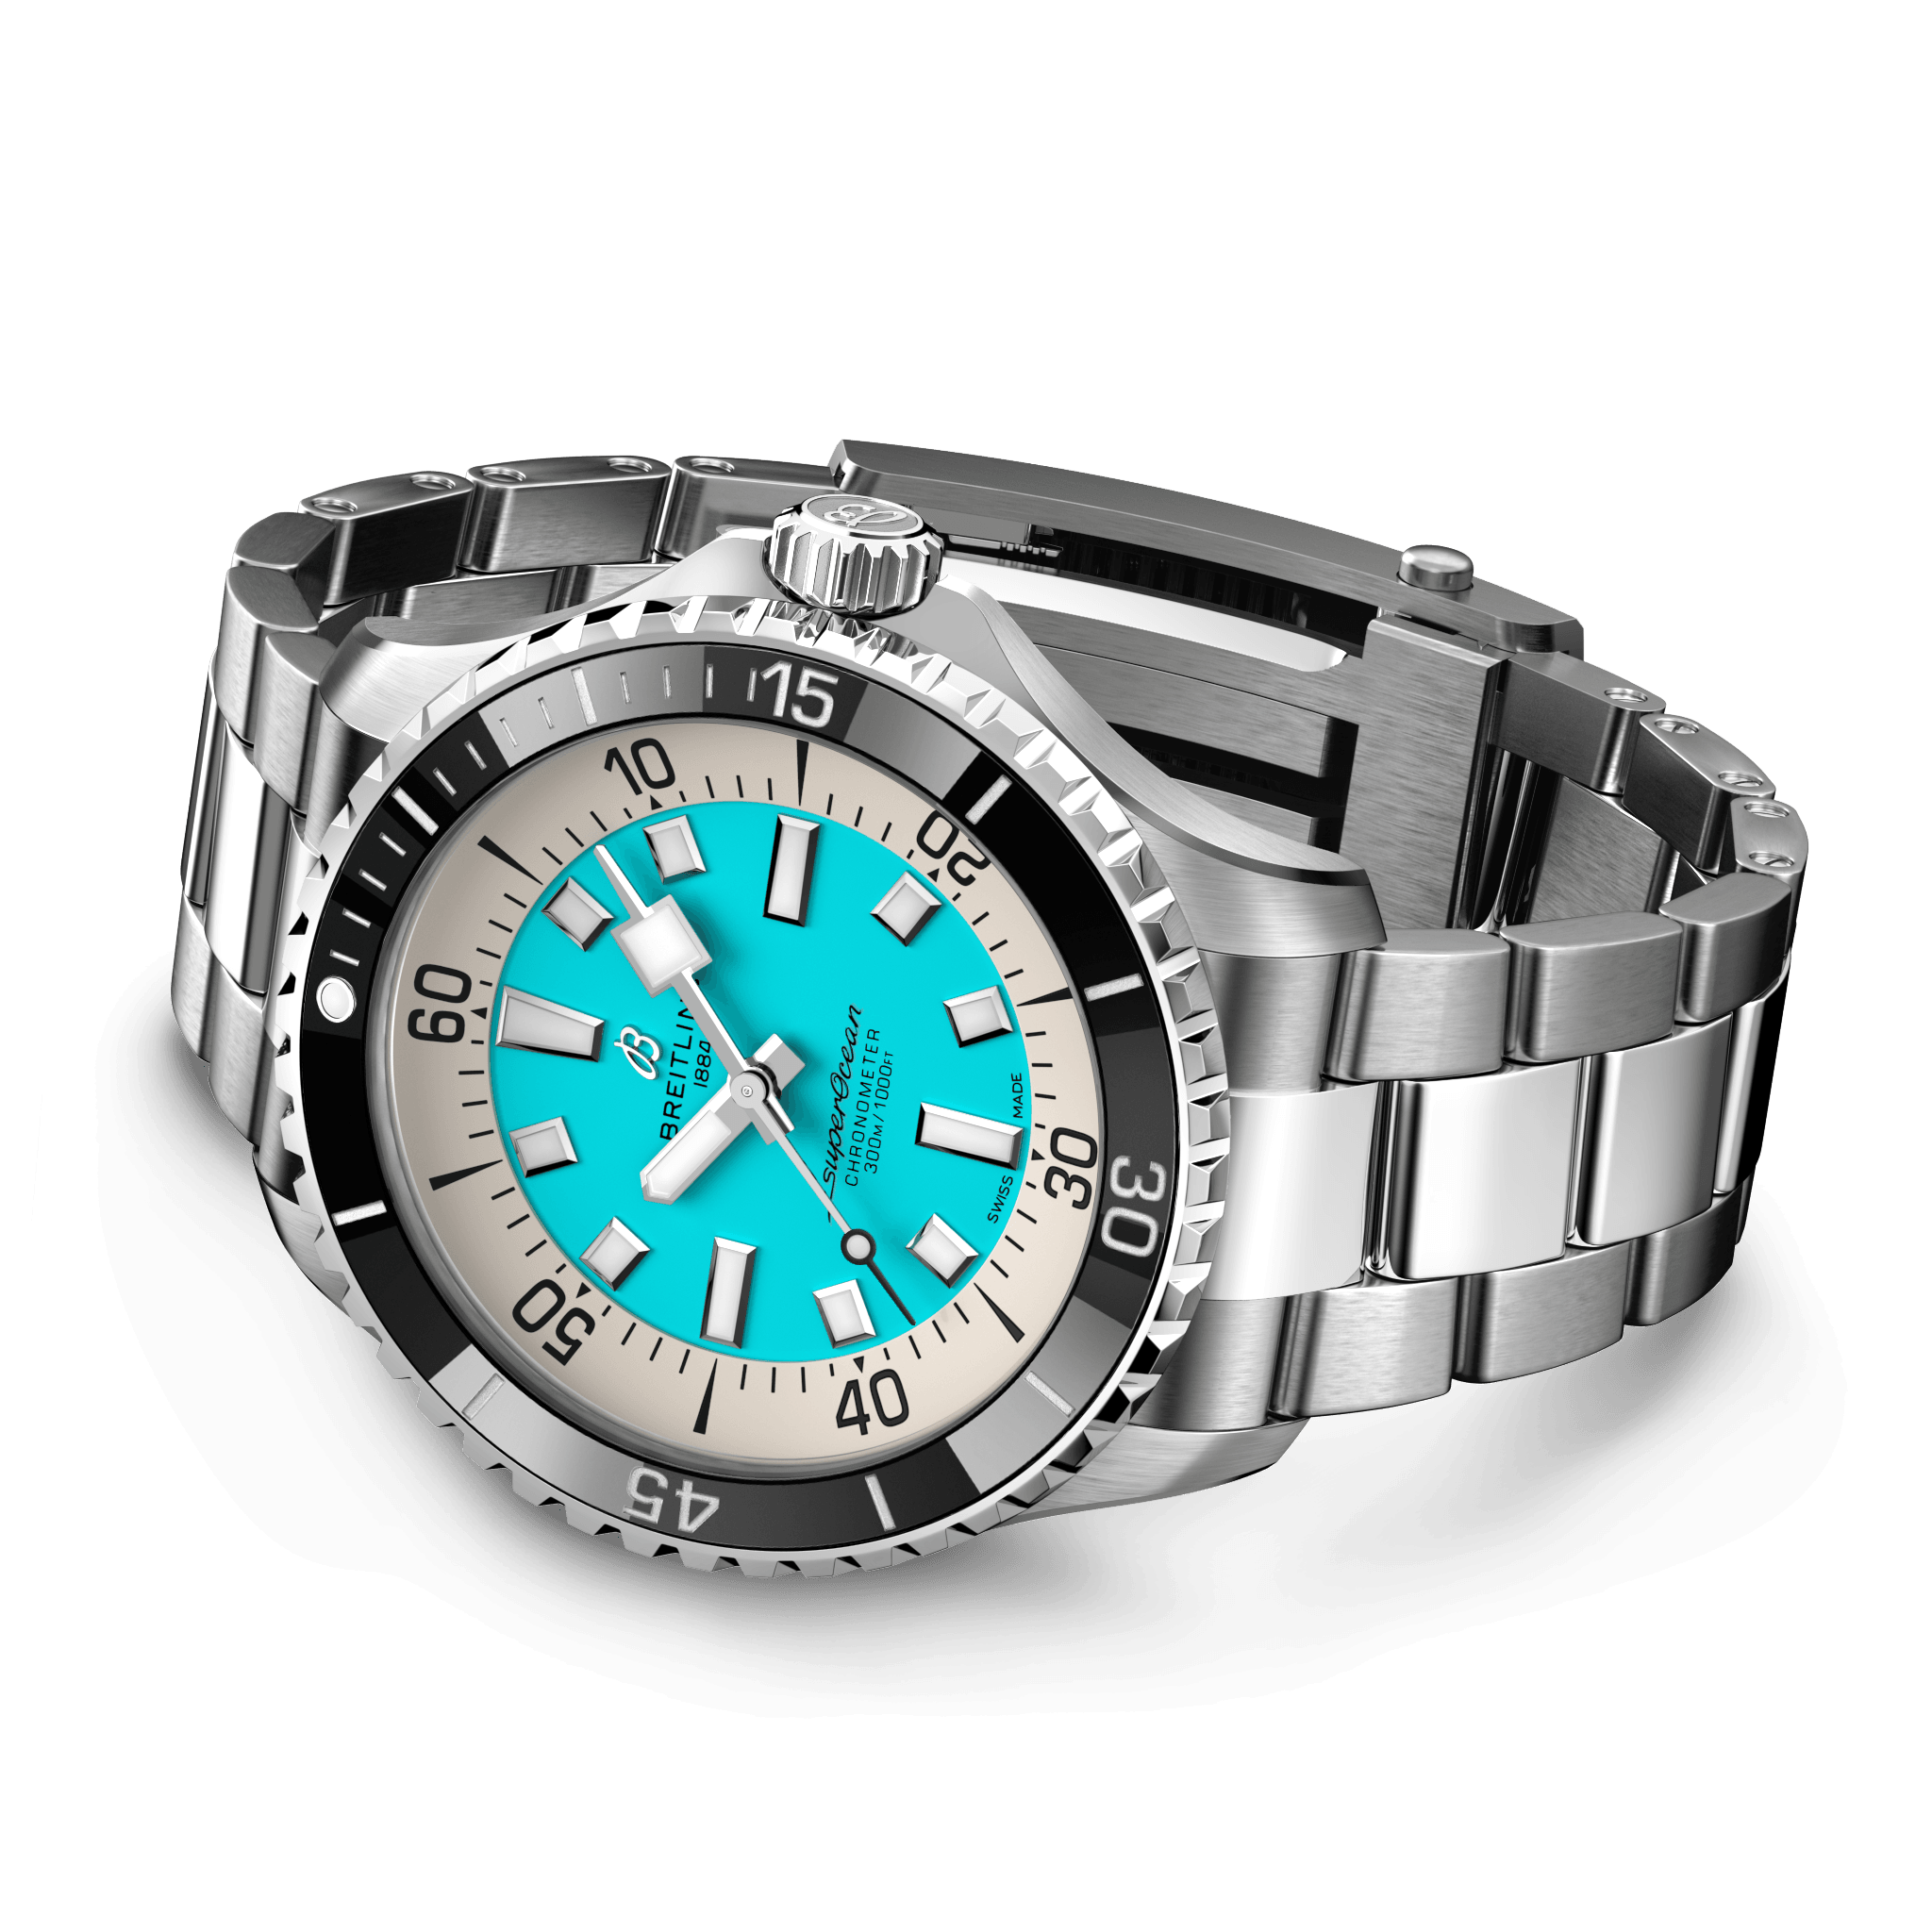 Breitling Superocean Automatic 44 Watch